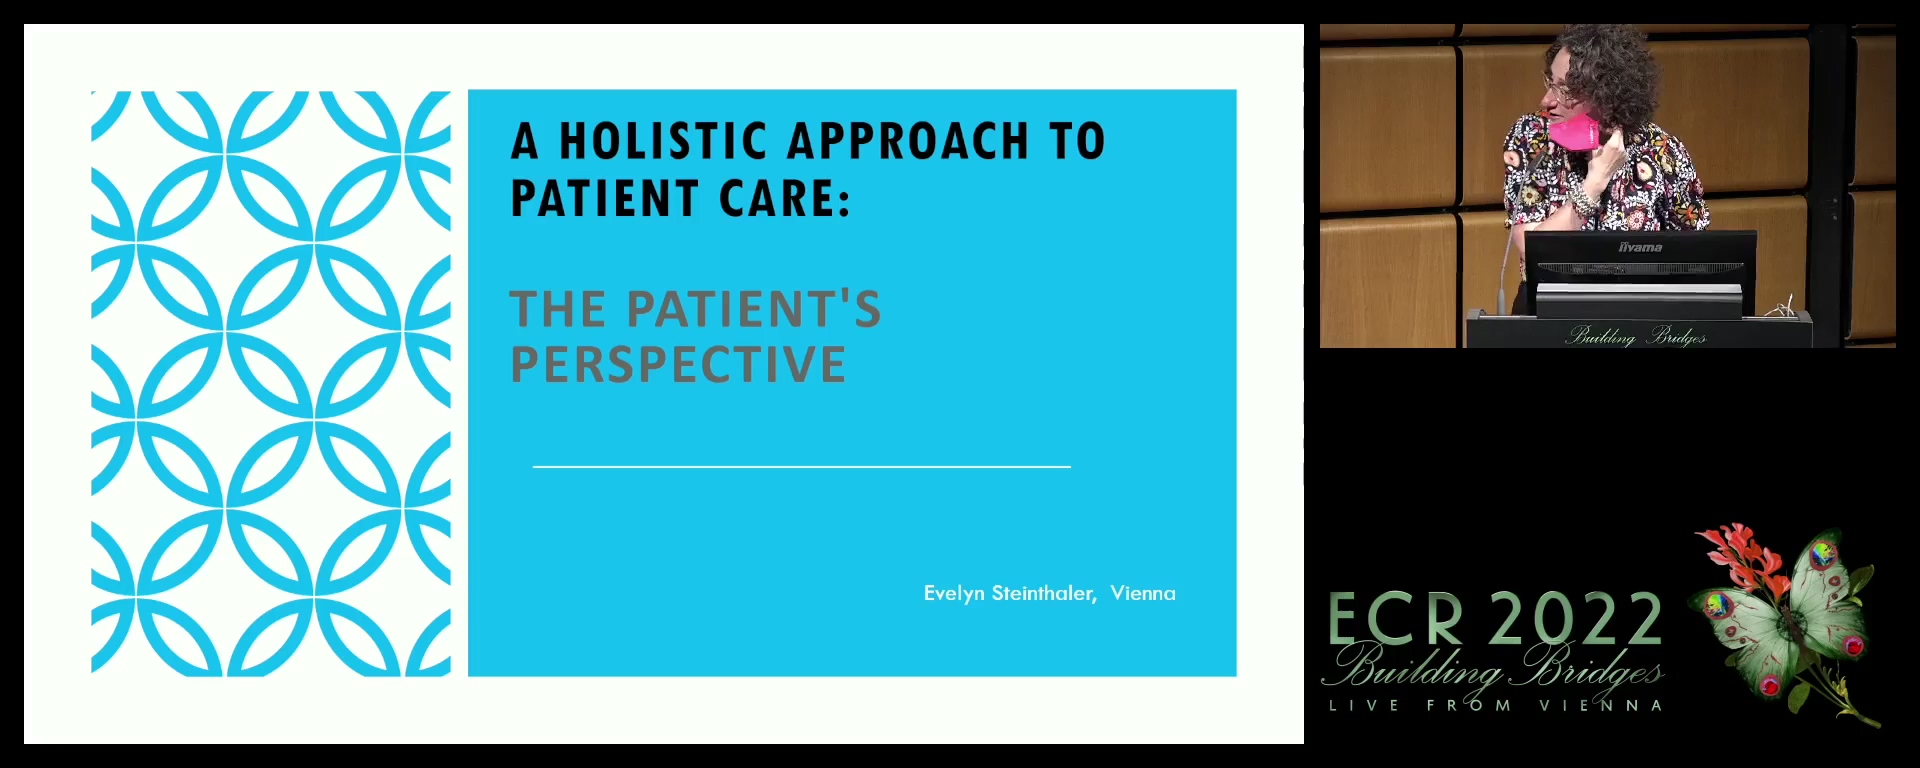 A holistic approach to patient care: the patient's perspective - Evelyn Steinthaler, Vienna / AT